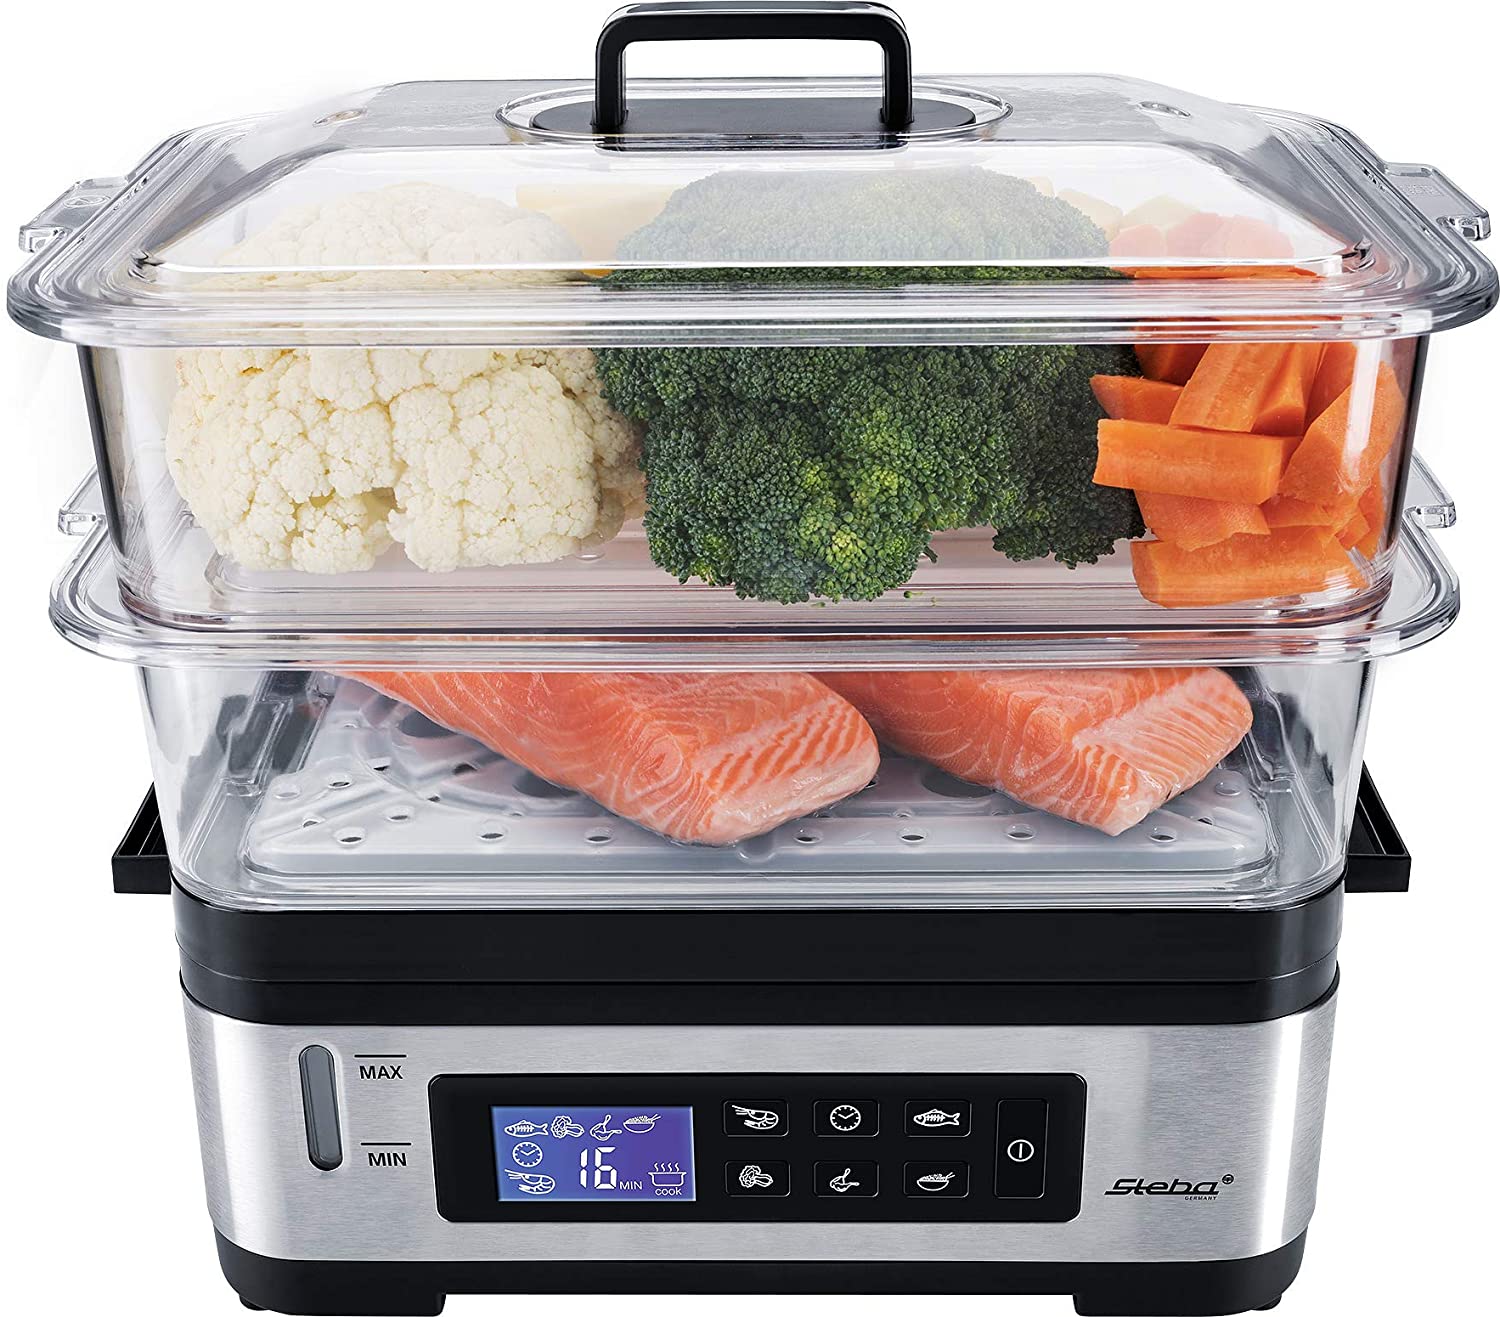 Steba DG 2 Electronic Steamer, Variable Cooking Chamber (3 - 6 Litres), BPA-Free, Includes Travel Insert, LCD Display with 5 Automatic Programmes, 30 Min Timer with Beep and End Shutdown